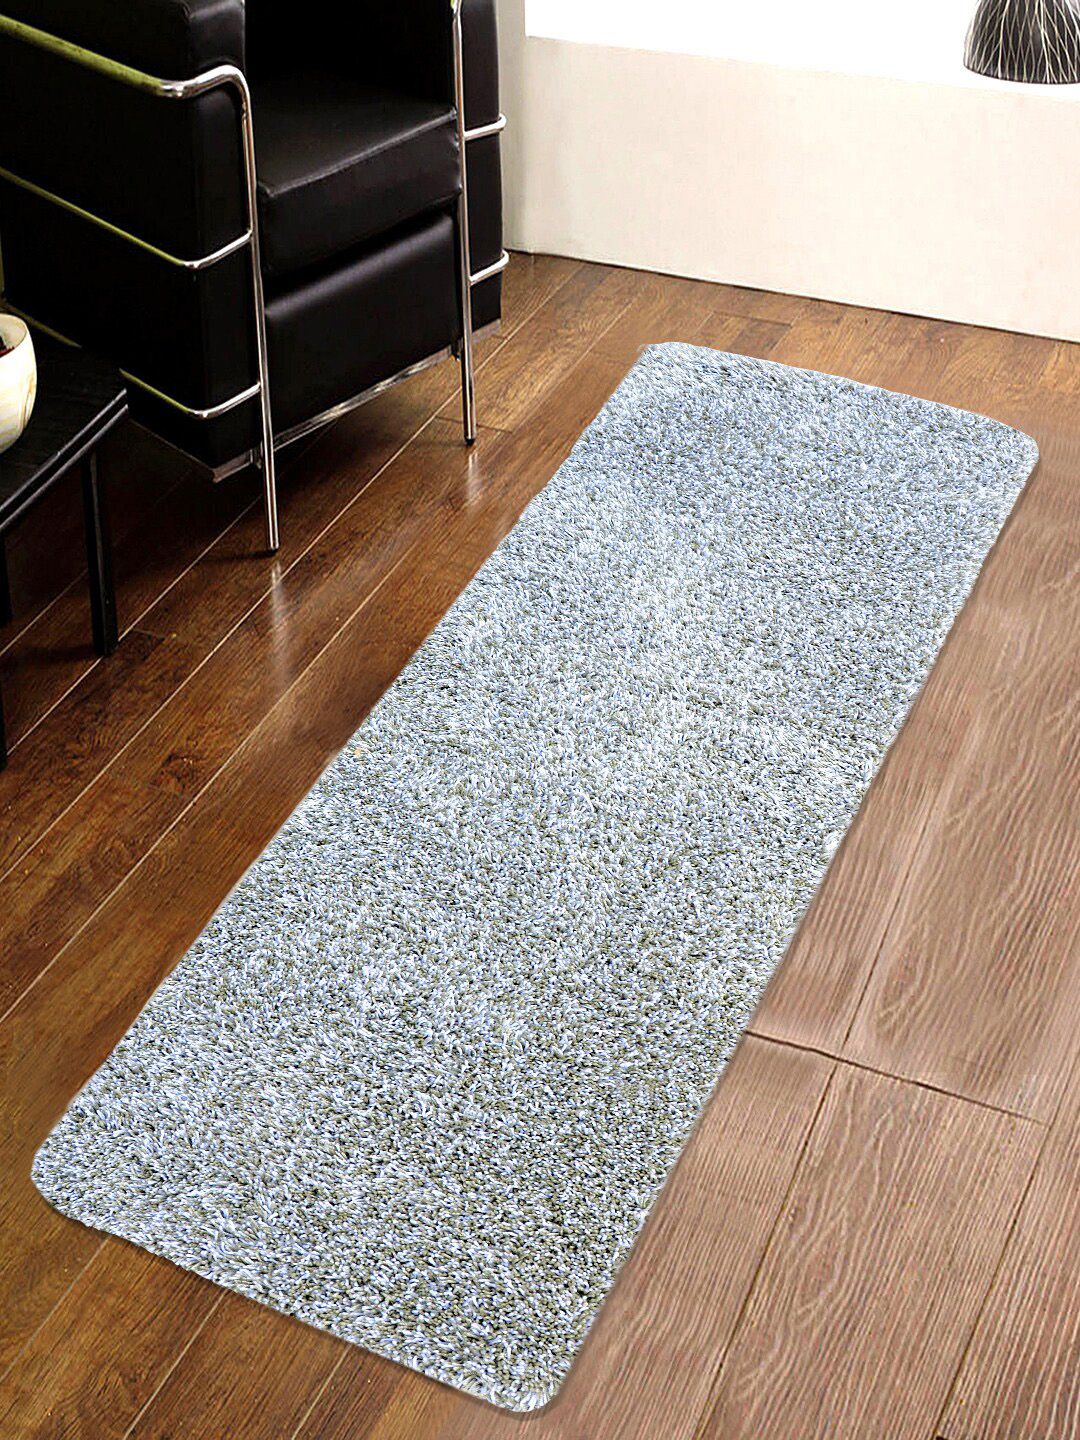 Saral Home Grey Solid Shaggy Anti-Skid Runner Price in India